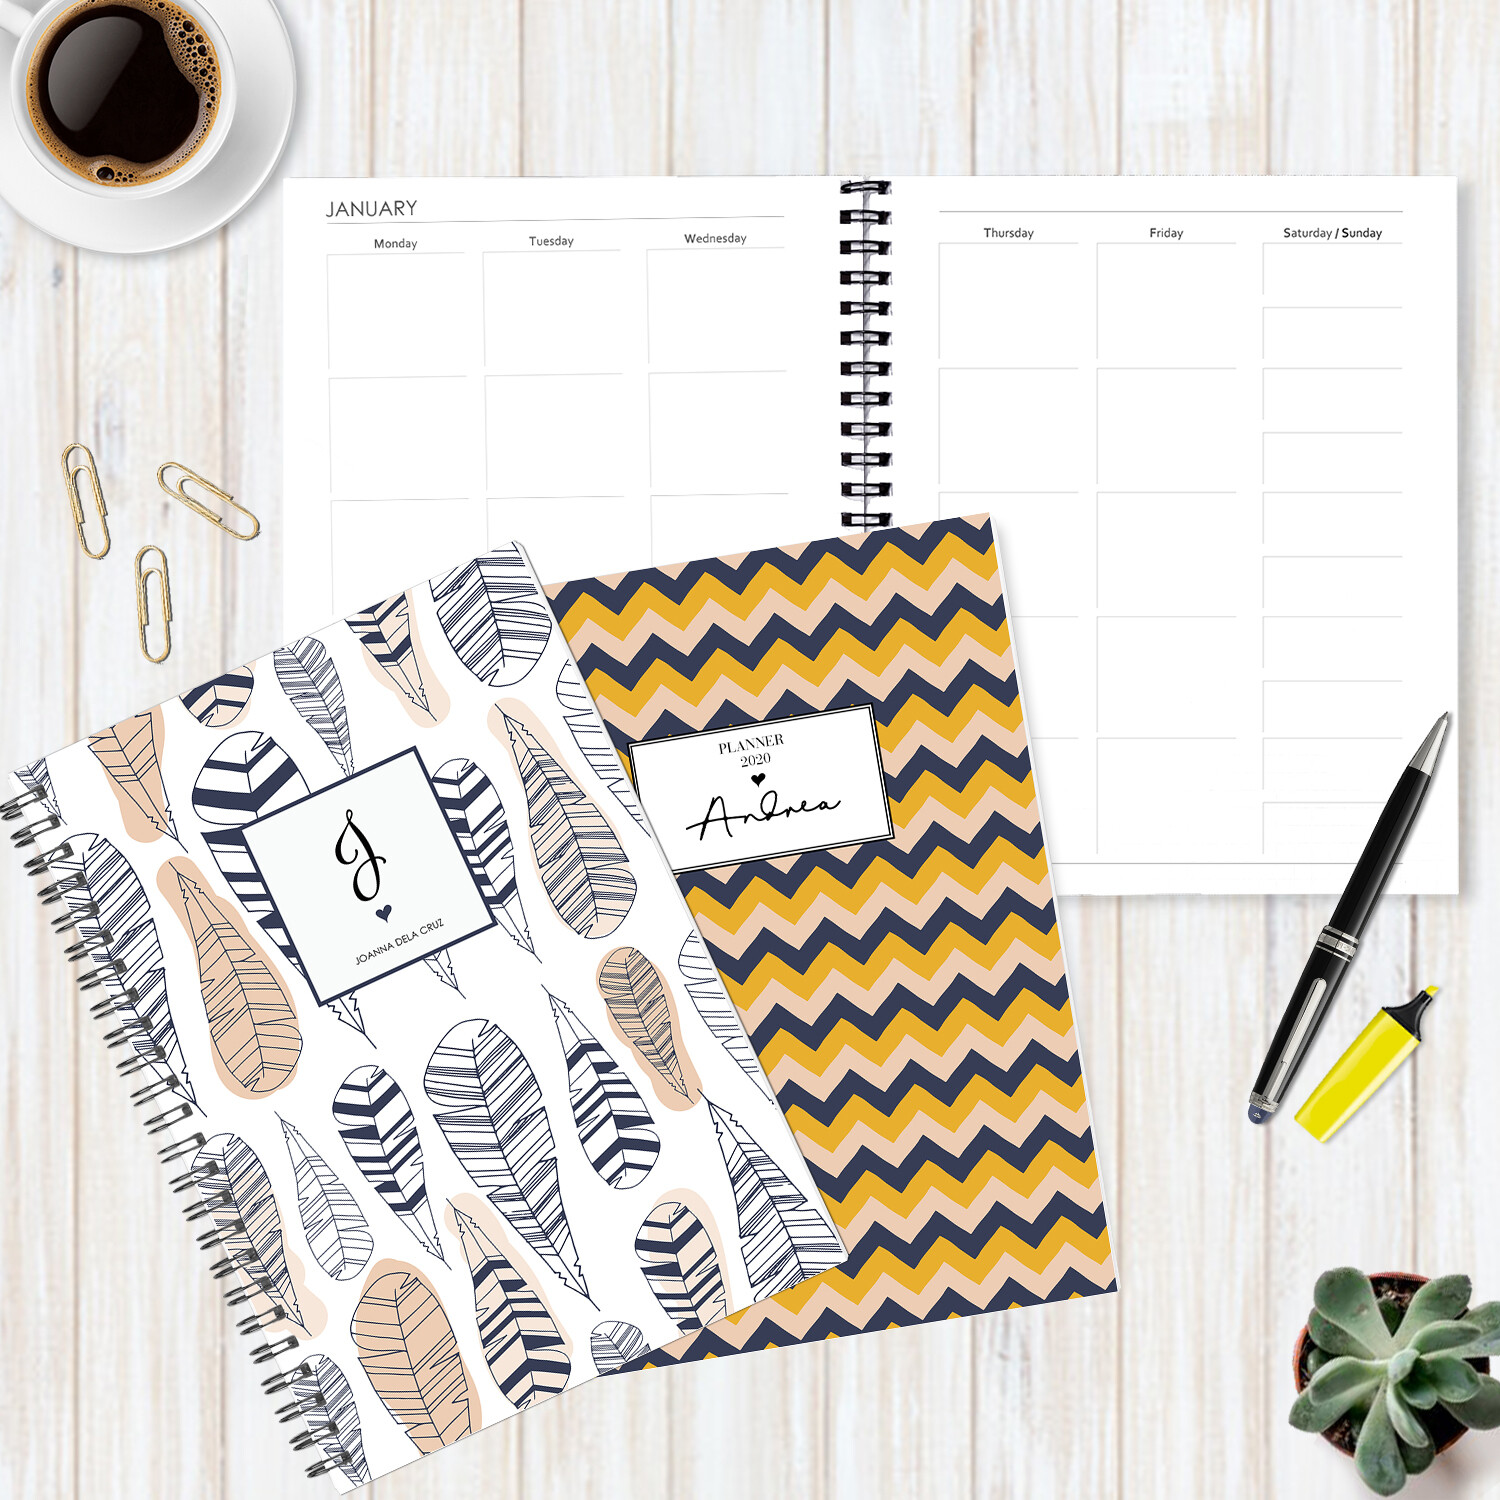 Undated Personalized Planner